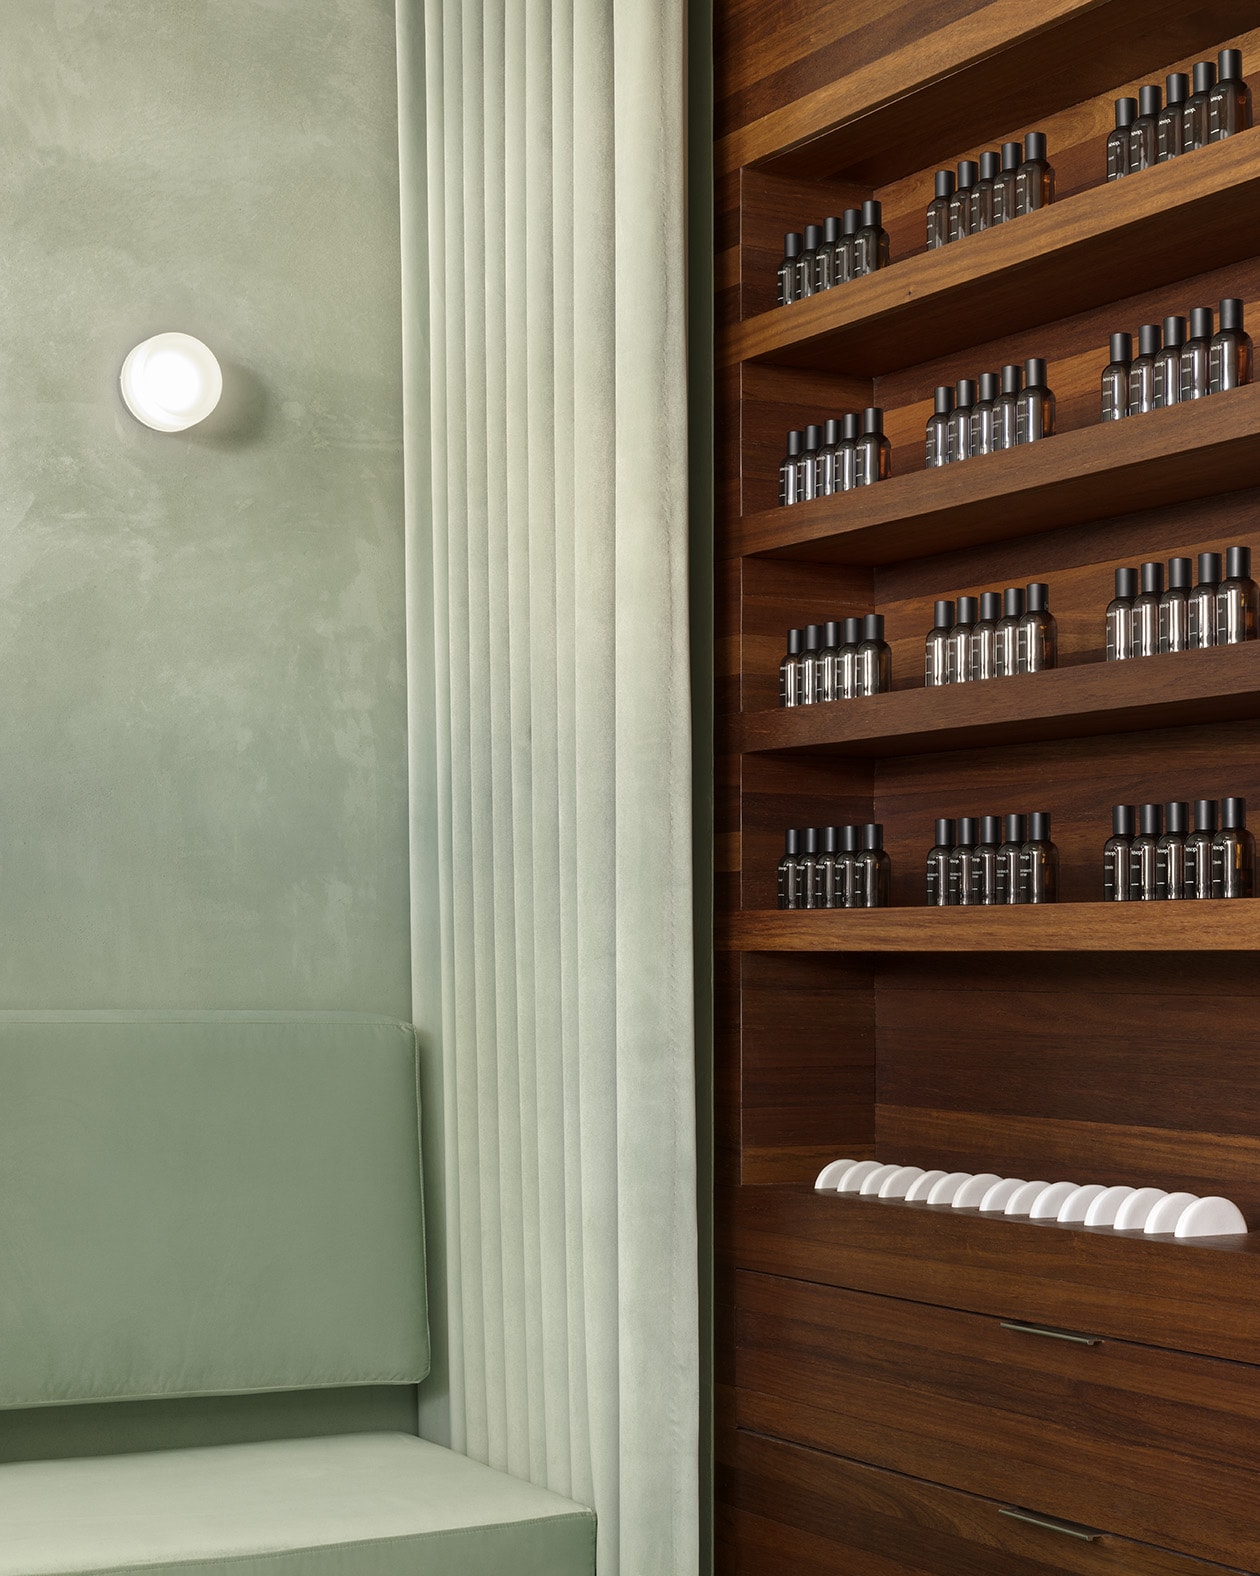 store interior photo featuring shelves with Aesop products